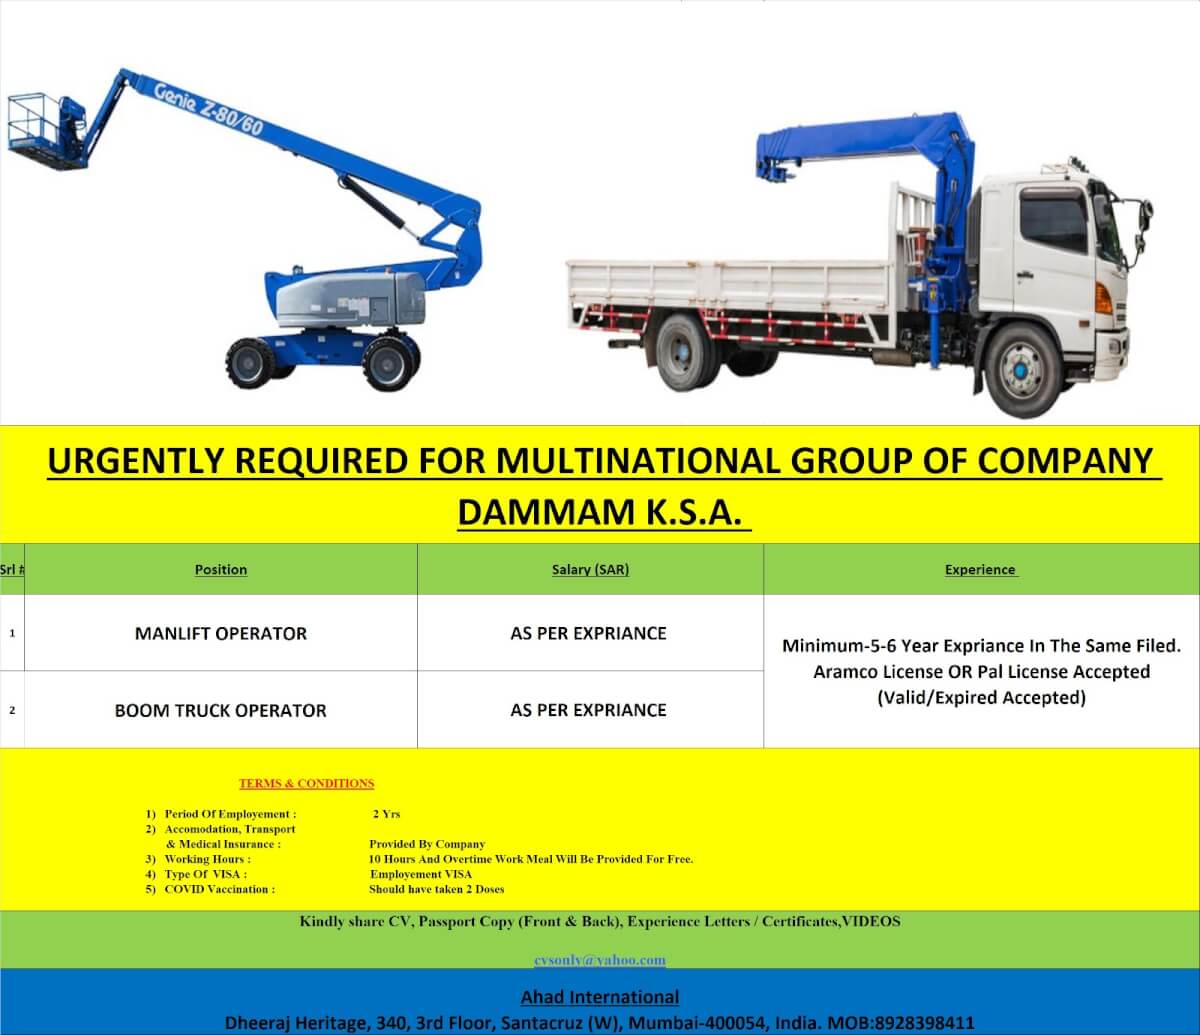 URGENTLY REQUIRED FOR SHIRKA MUSANADAH ( AL TAMIMI SISTER CONCERN COMPANY DAMMAM K.S.A.